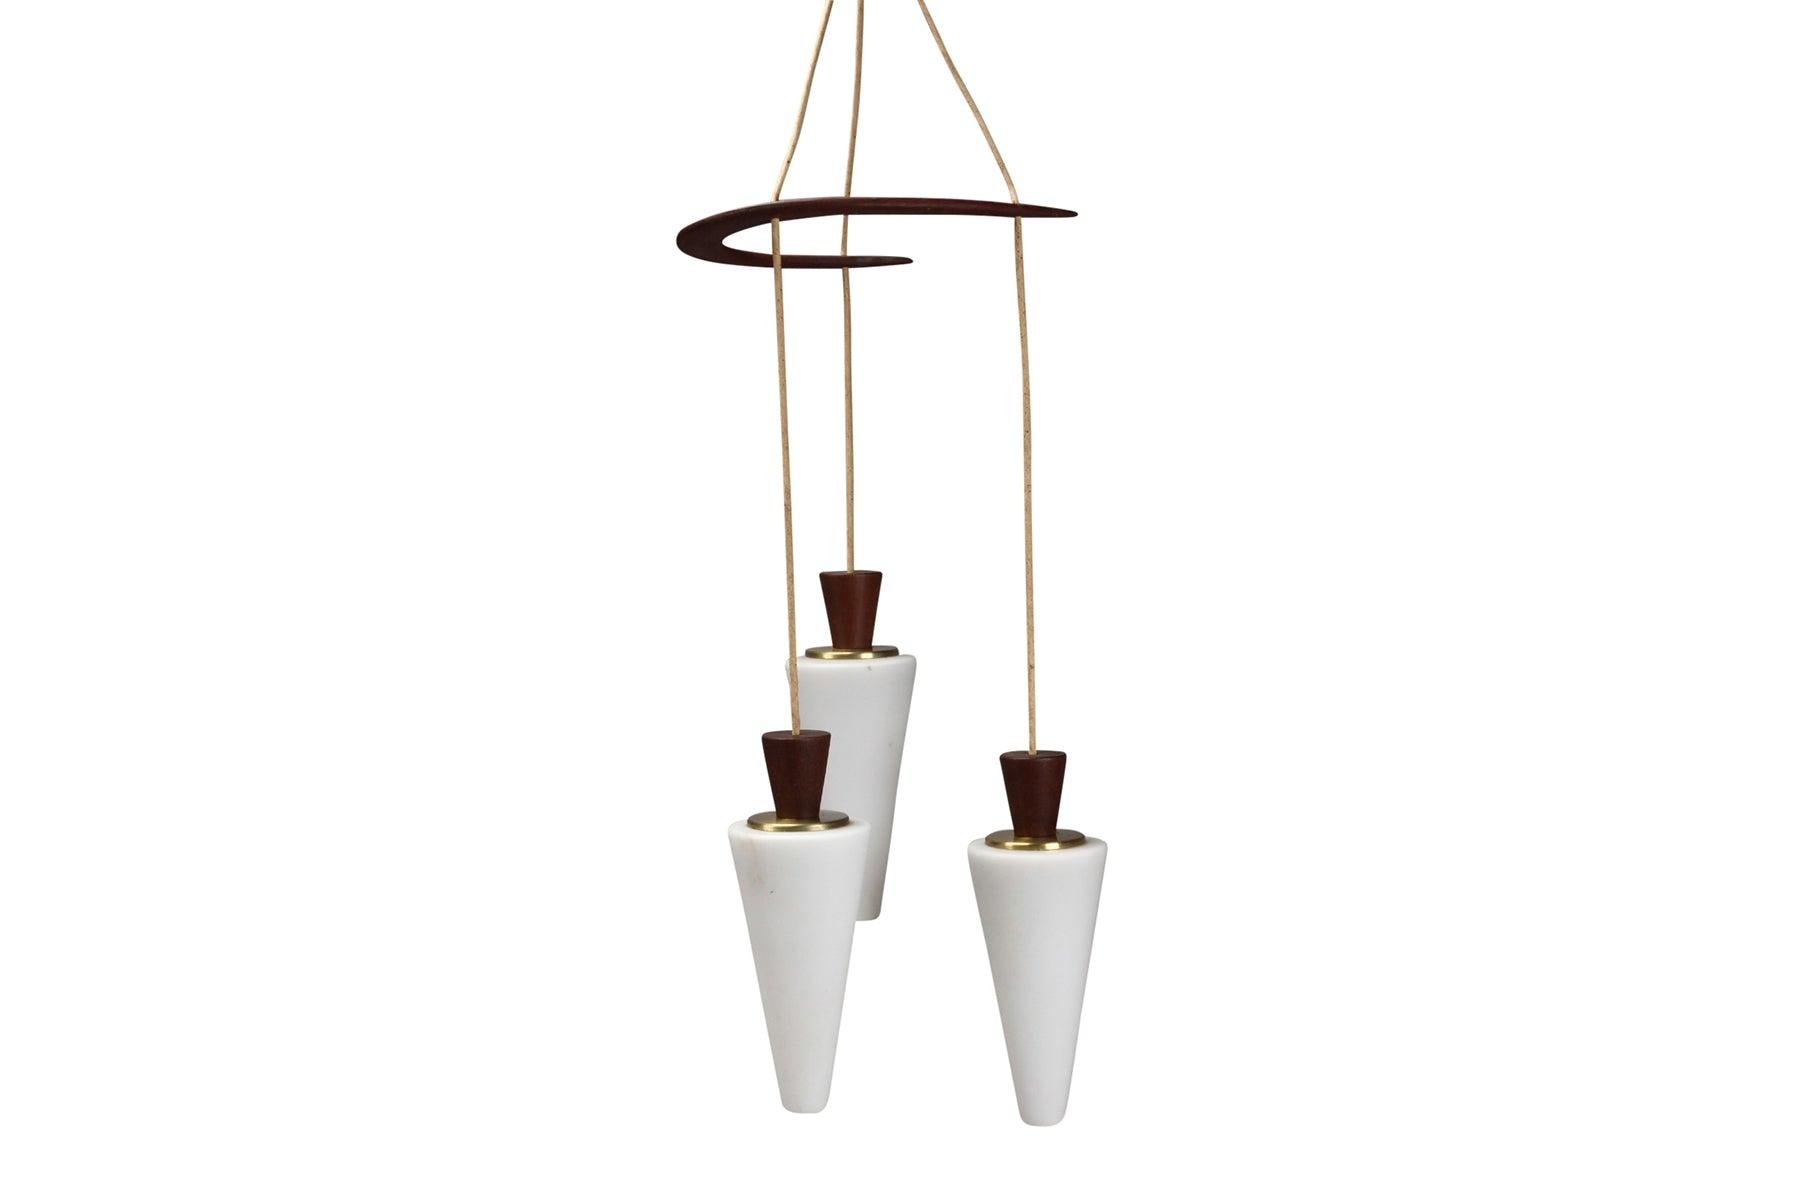 Rosewood Atomic Tri-Pendant Lamp In Teak With Frosted Glass Cones For Sale